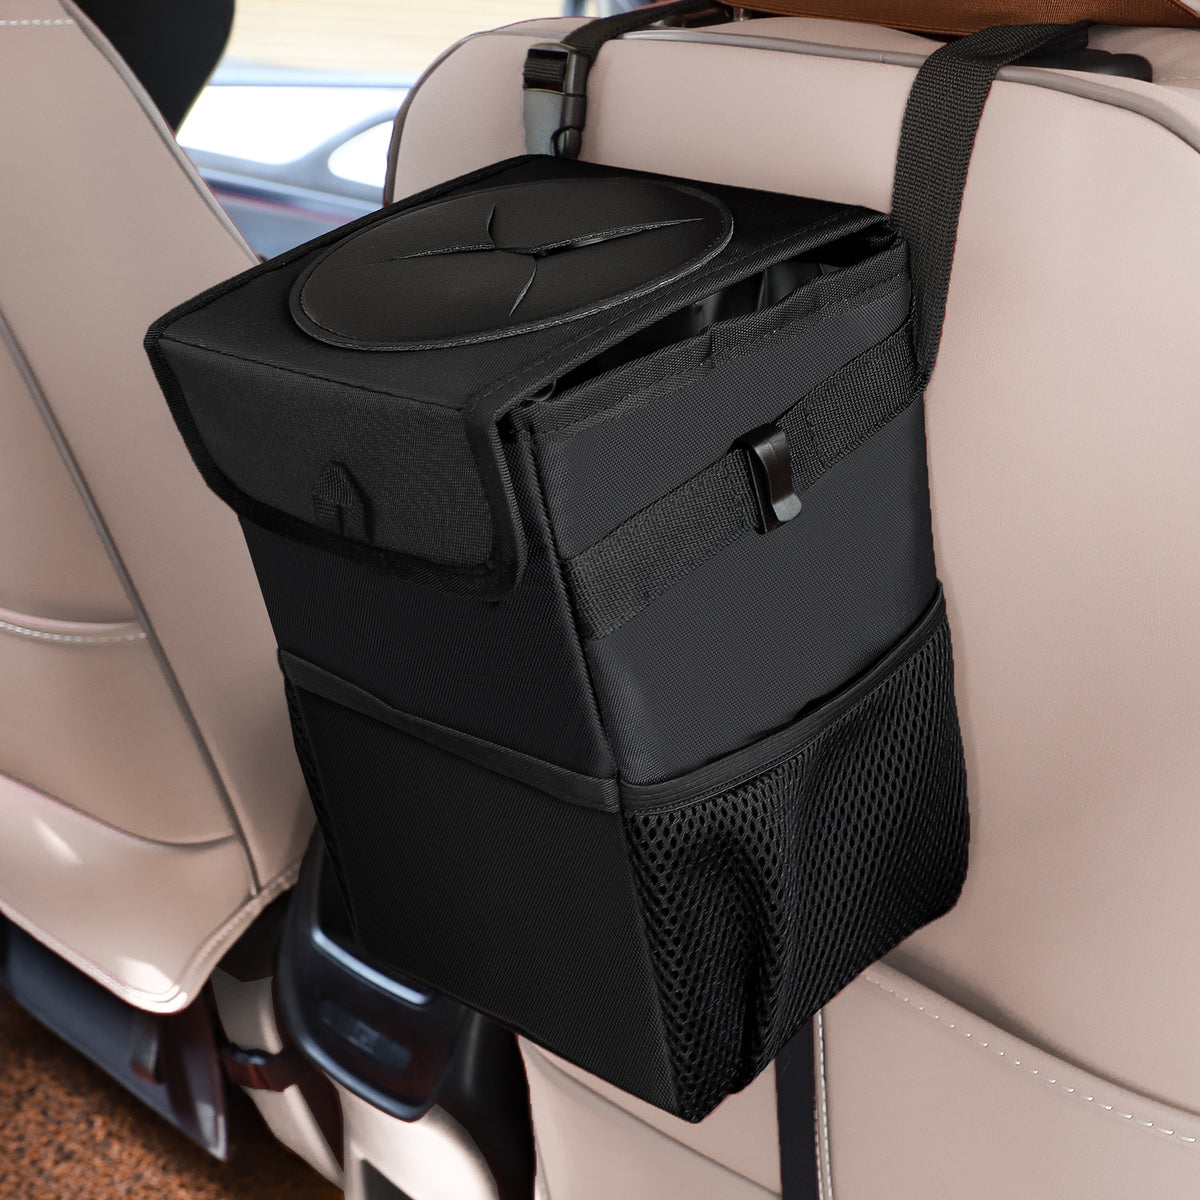 Leak-Proof Collapsible Garbage Bin for Car